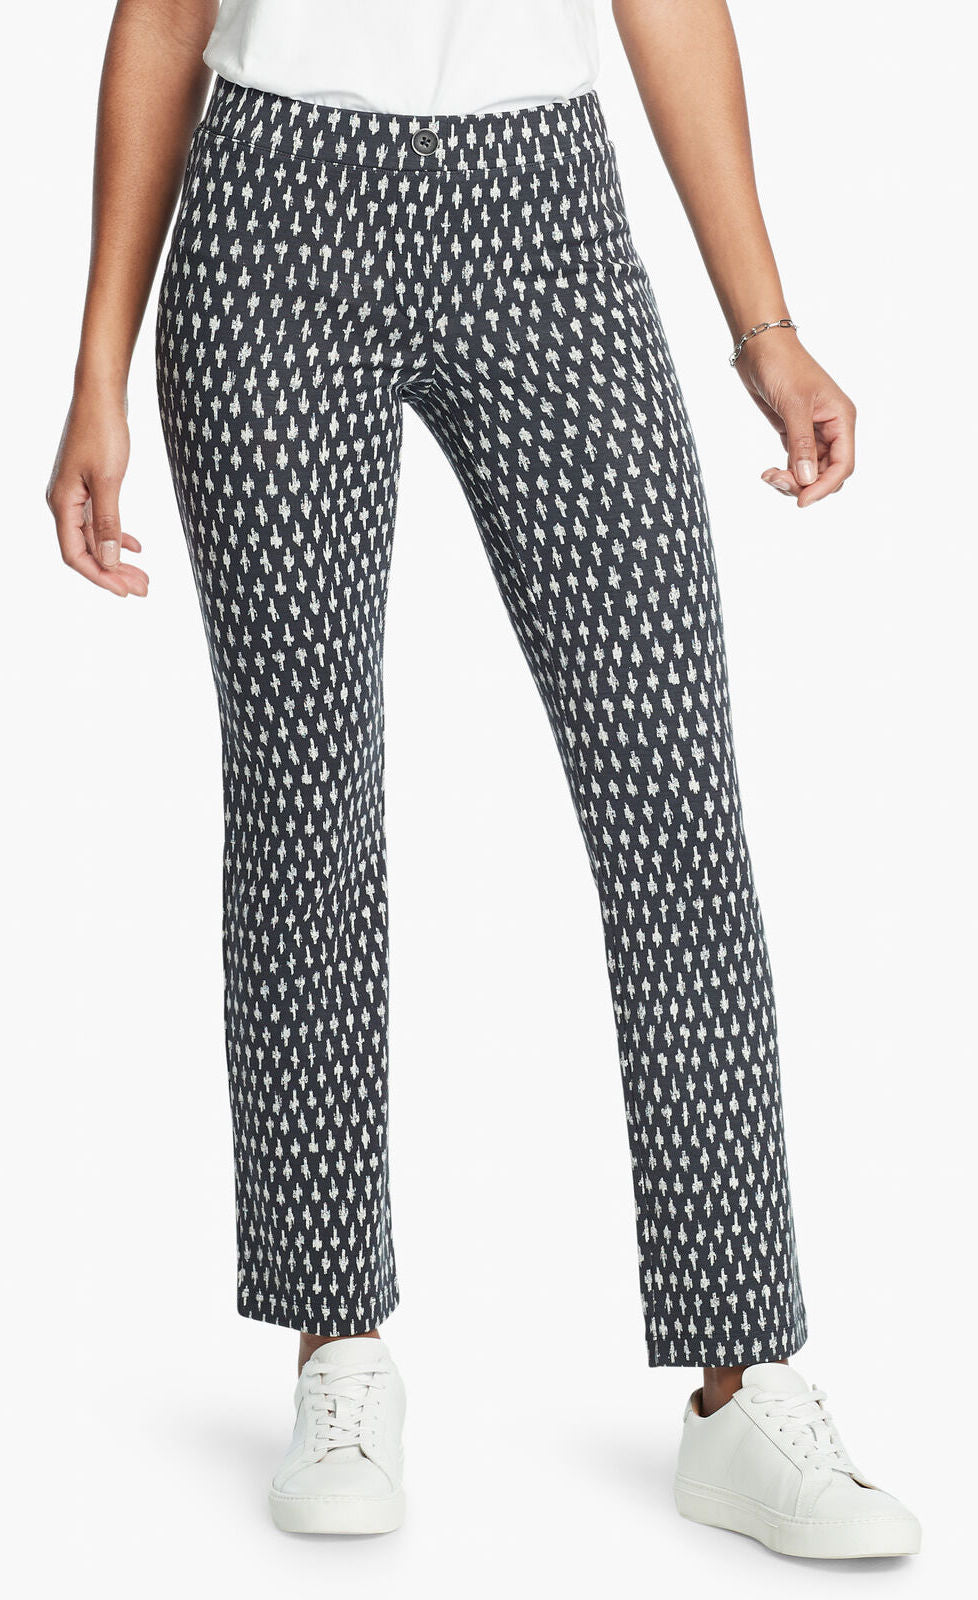 Front, bottom half view of a woman wearing the Nic + Zoe Ponte Ikat Pant. These pants are indigo with white speckled print. They have a straight leg and sit above the ankles.